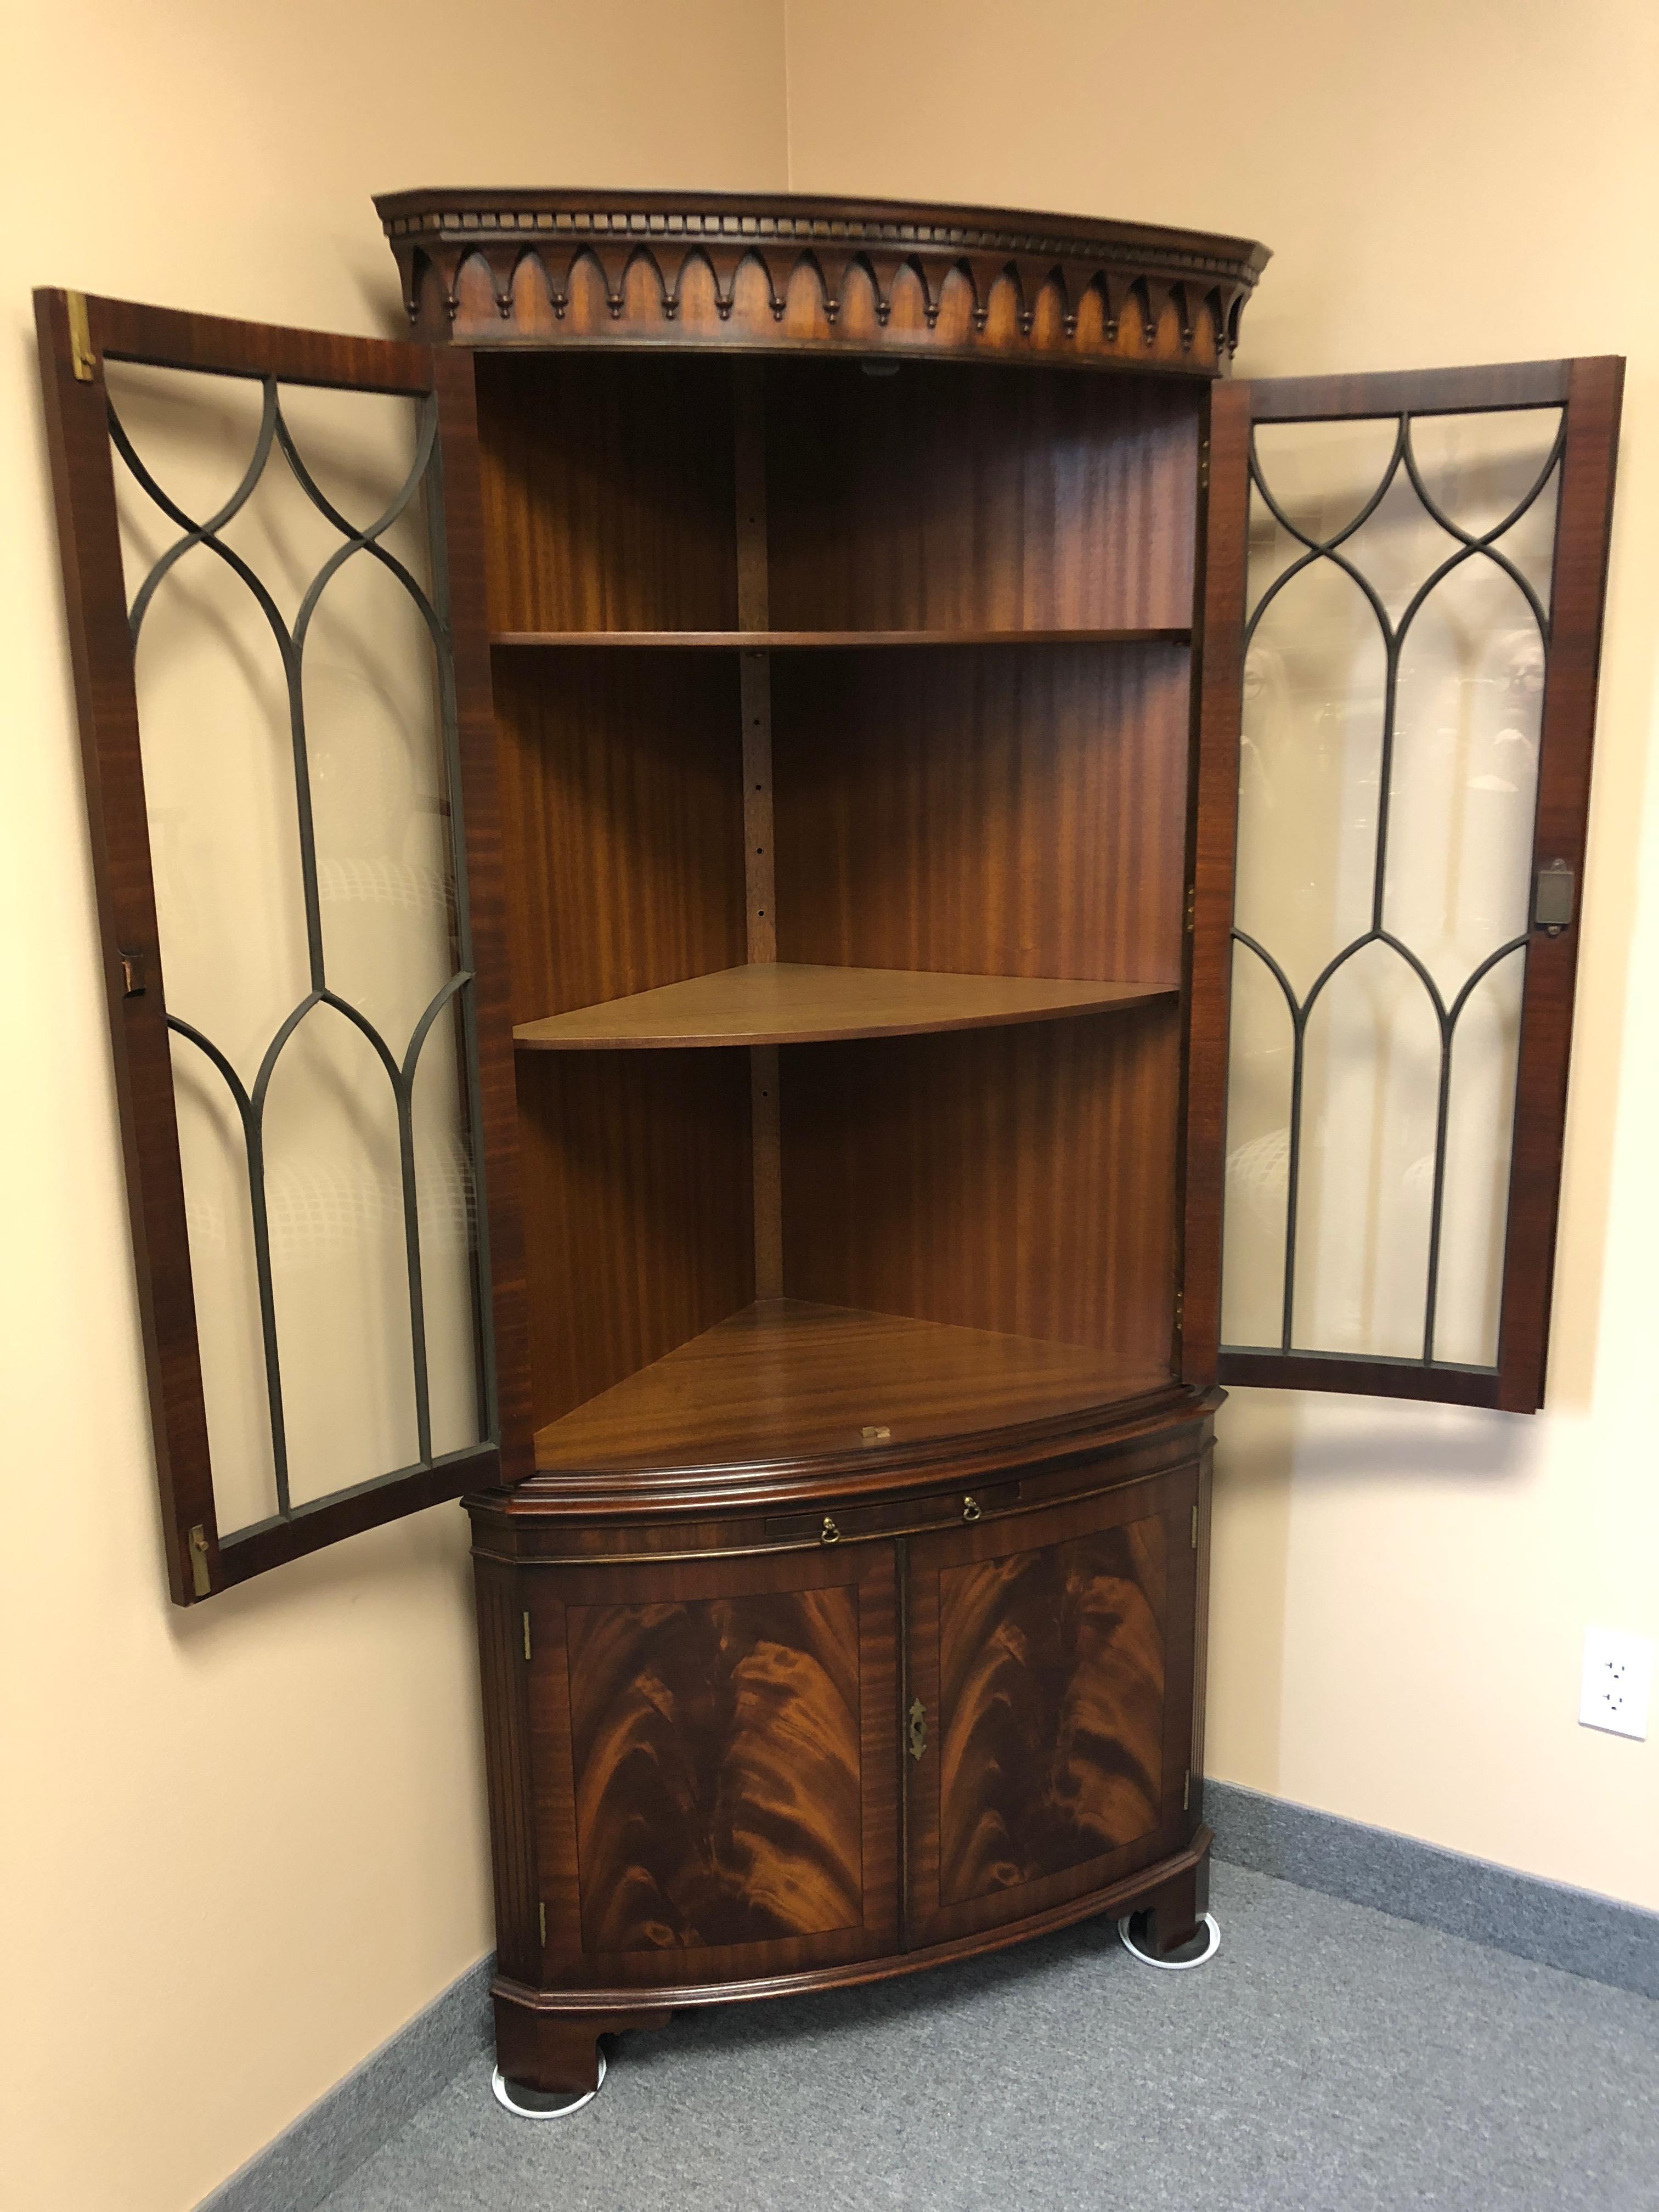 Beautifully made flame mahogany corner cupboard having a curved front with two lovely paned glass doors with 3 interior shelves, gorgeous carved wood decorative pediment, a pull out glide, and two doors at the bottom with storage inside. Key